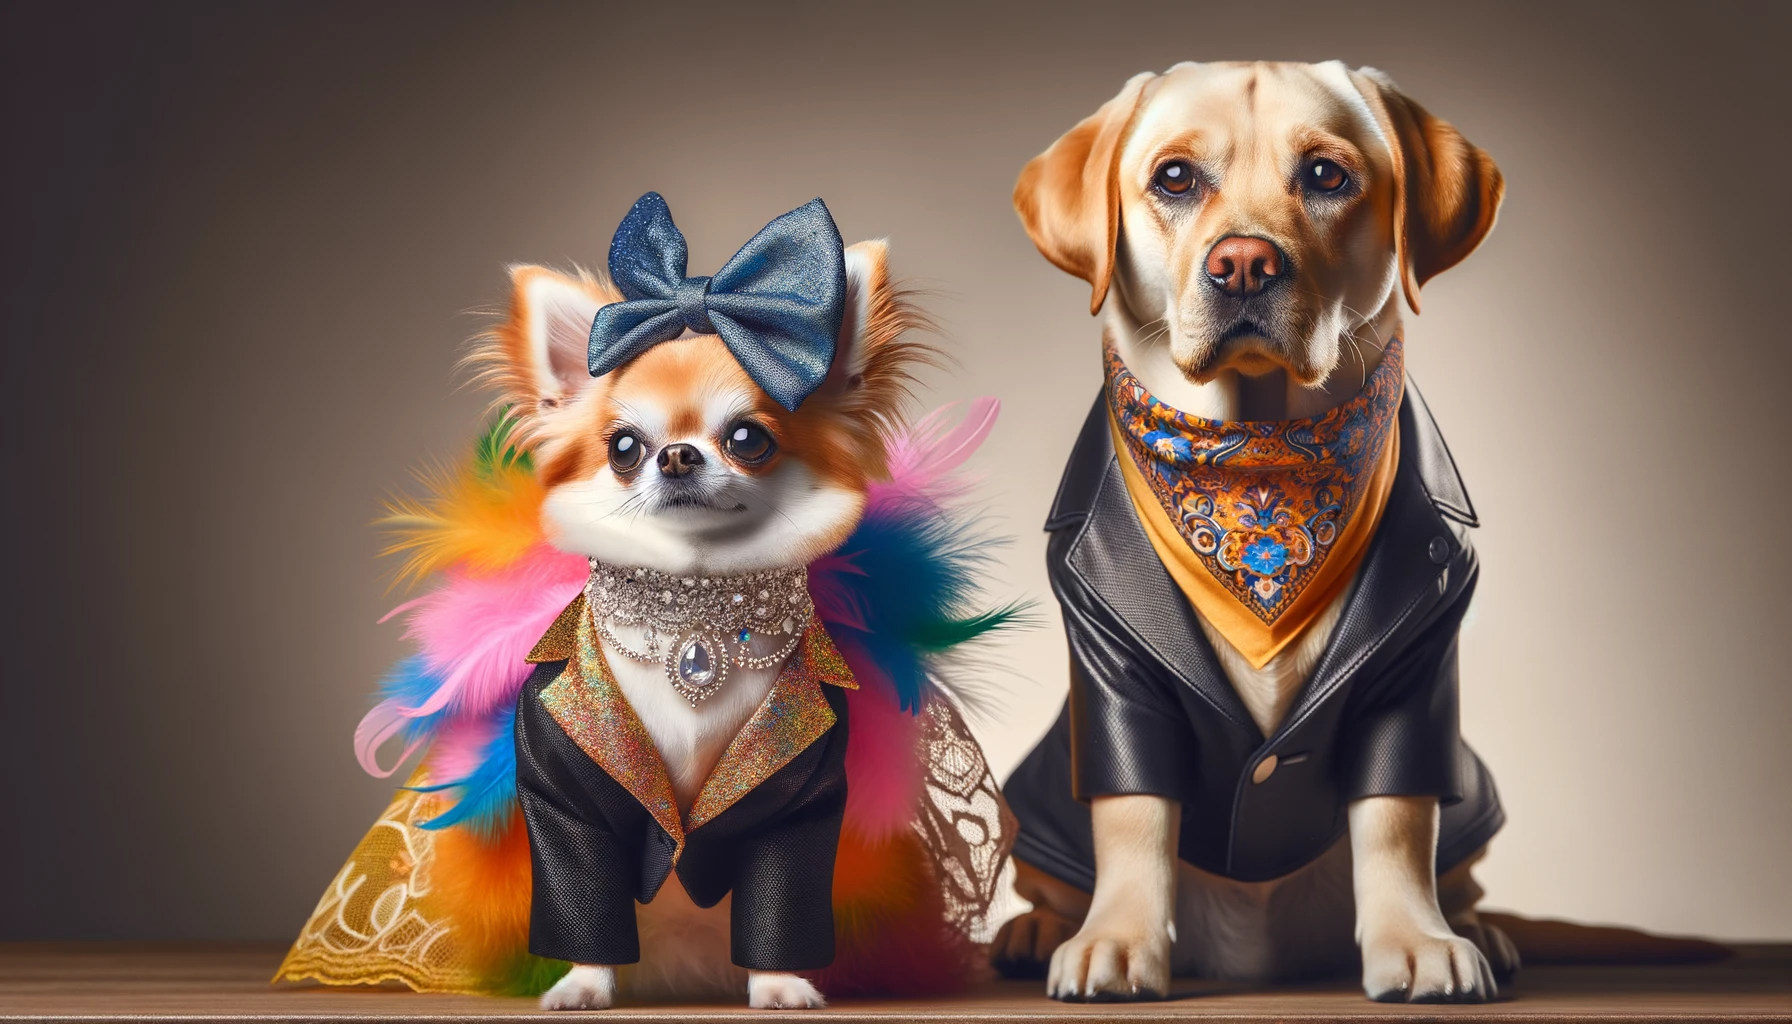 A dazzling Chihuahua dressed in a sequined outfit next to a Labrador Retriever adorned with a superhero cape, embodying the vibrant mix of traits found in a Labrahuahua